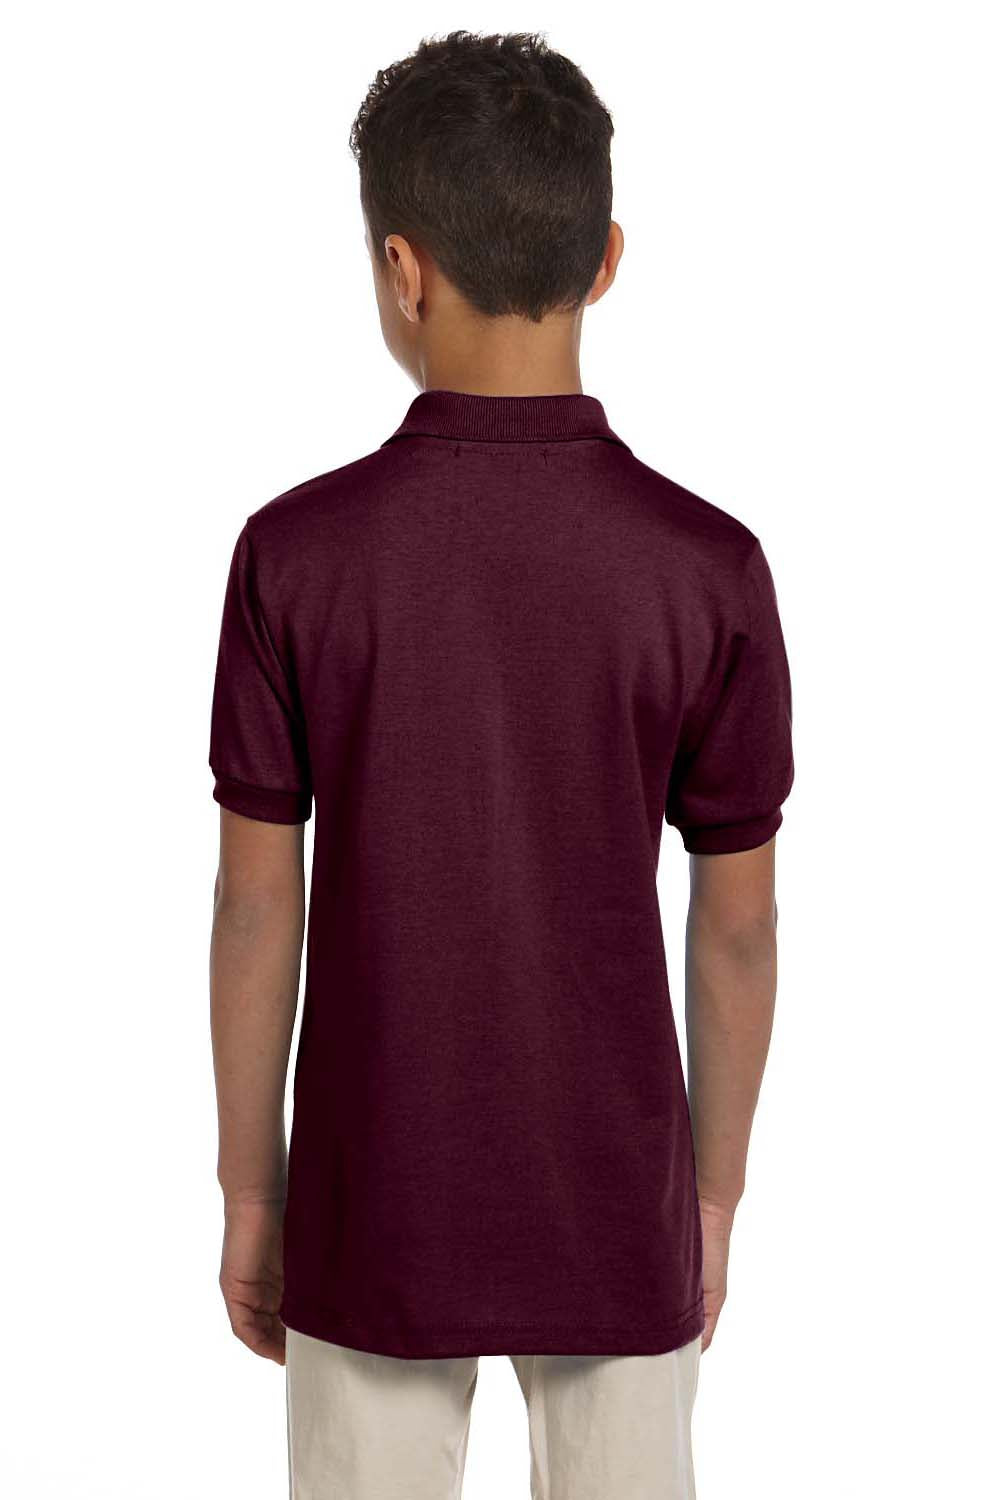 Jerzees 437Y Youth SpotShield Stain Resistant Short Sleeve Polo Shirt Maroon Back